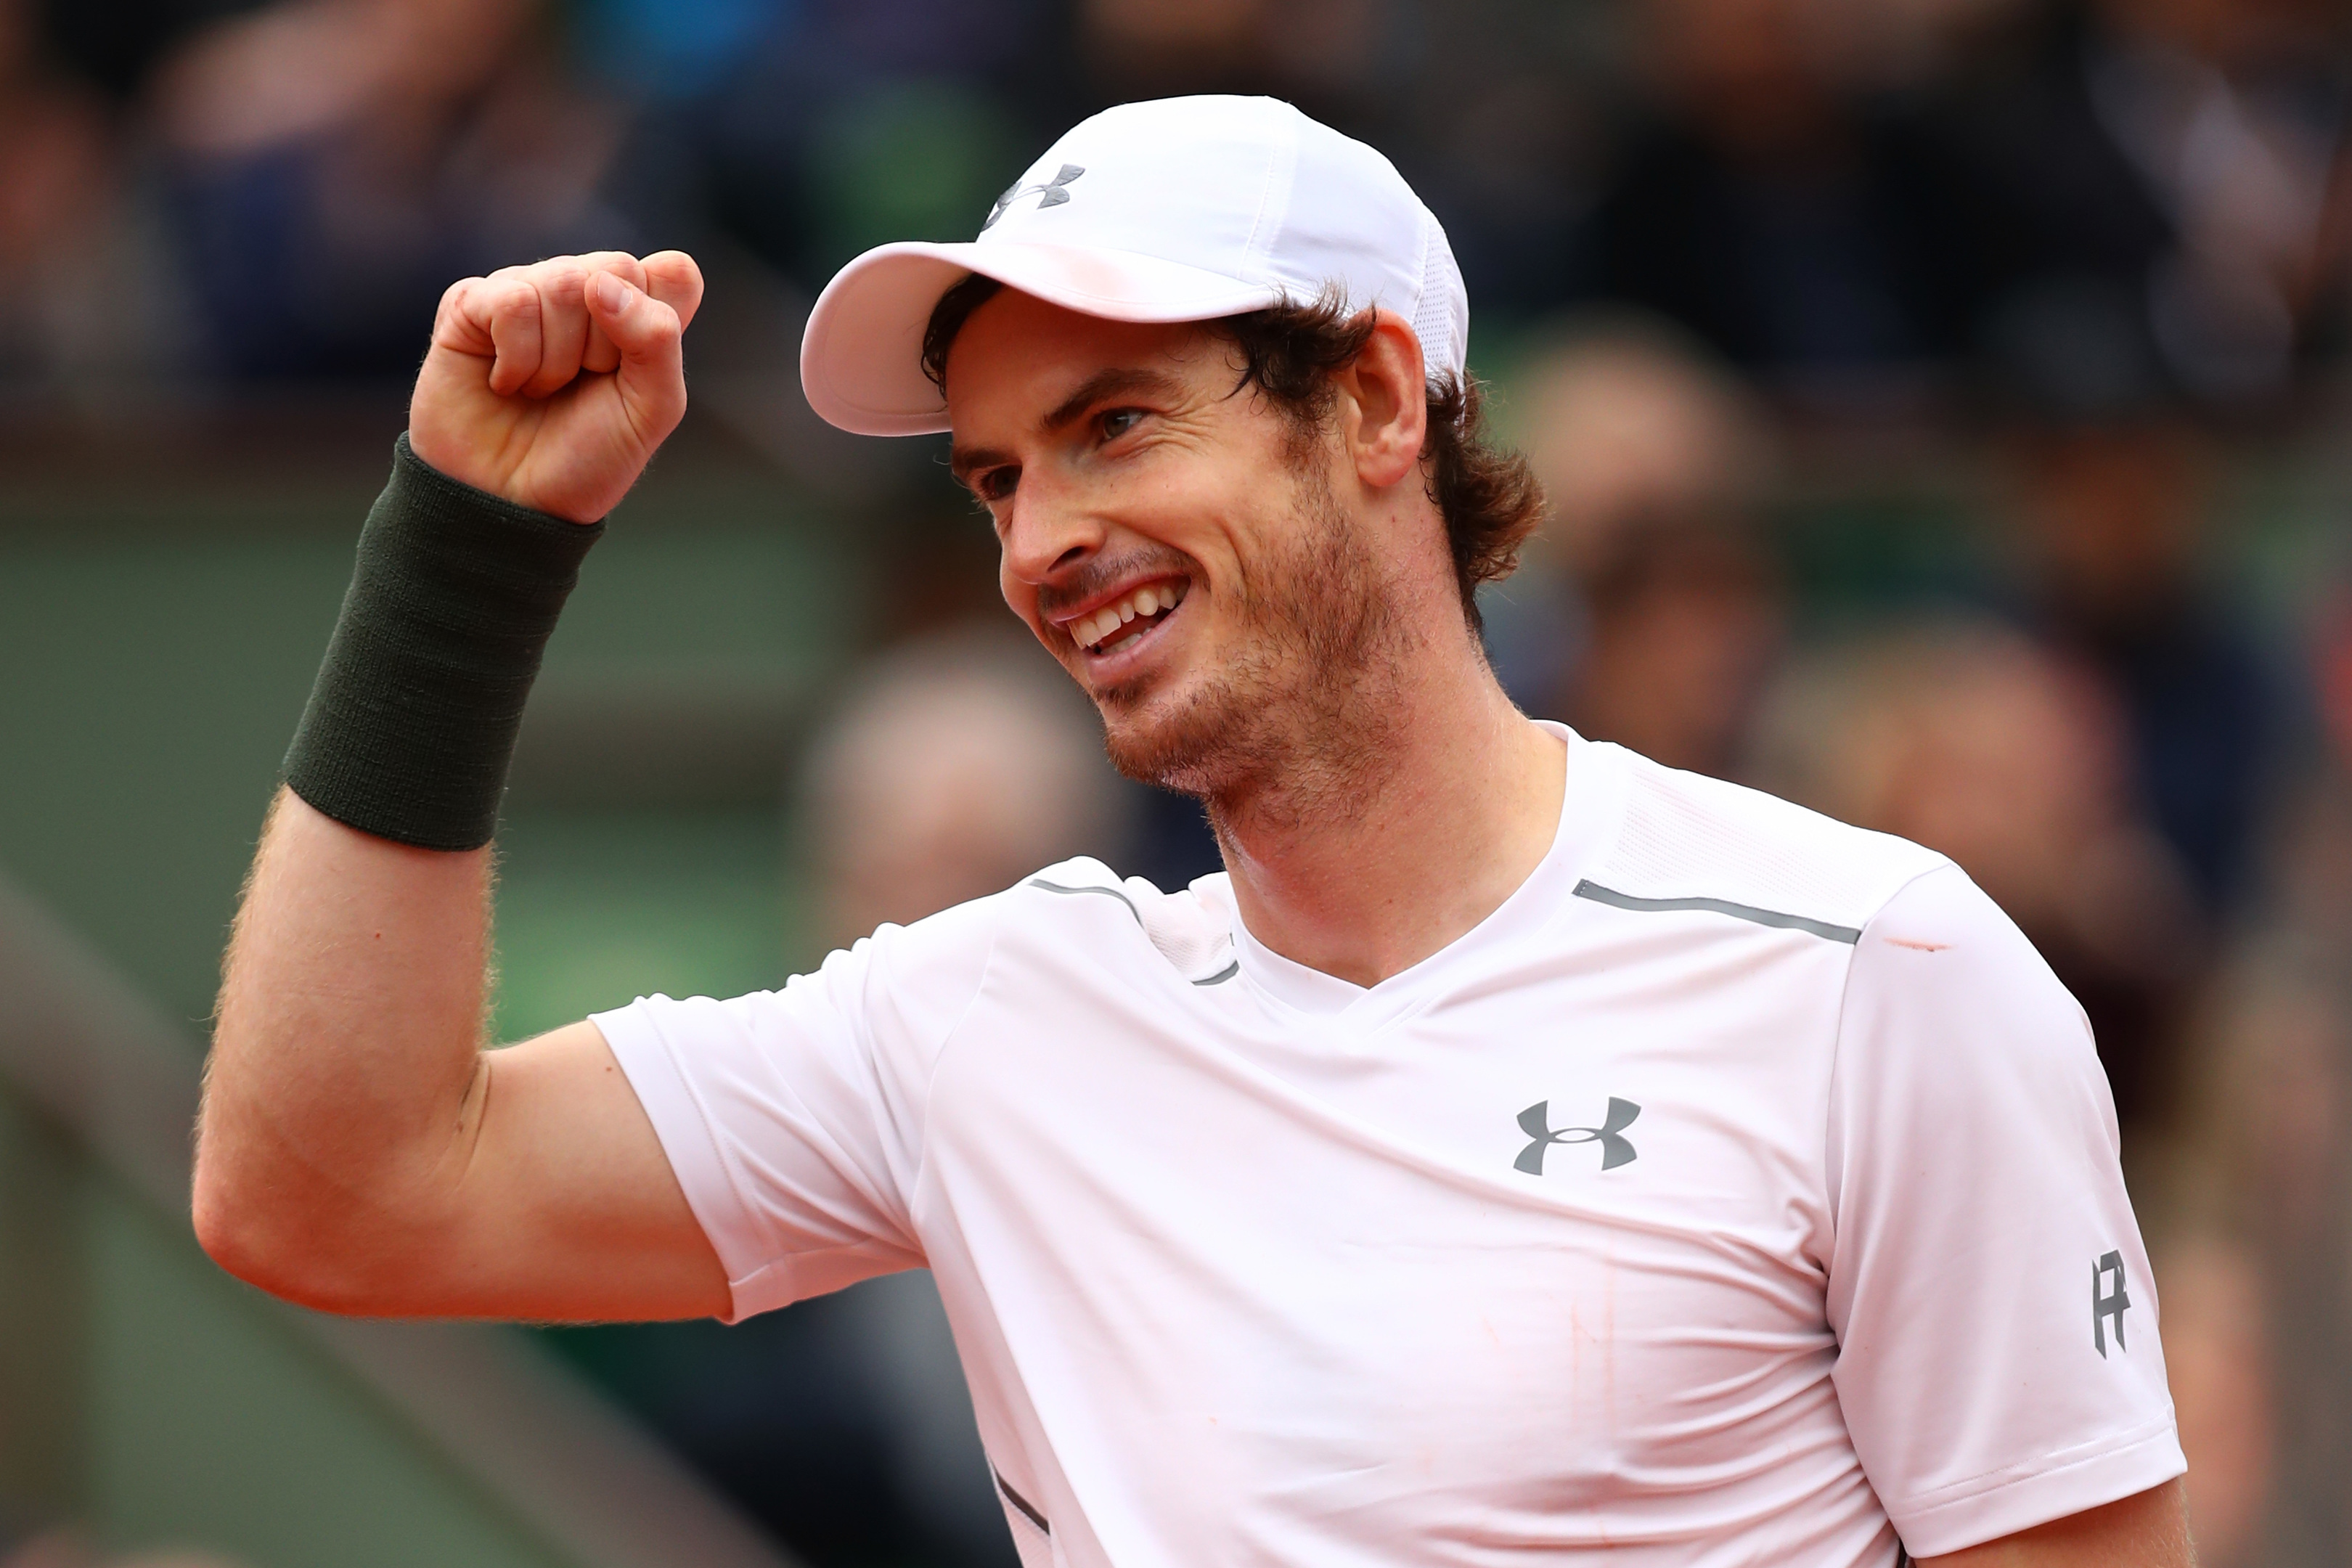 Andy Murray is aiming for a second Wimbledon triumph.